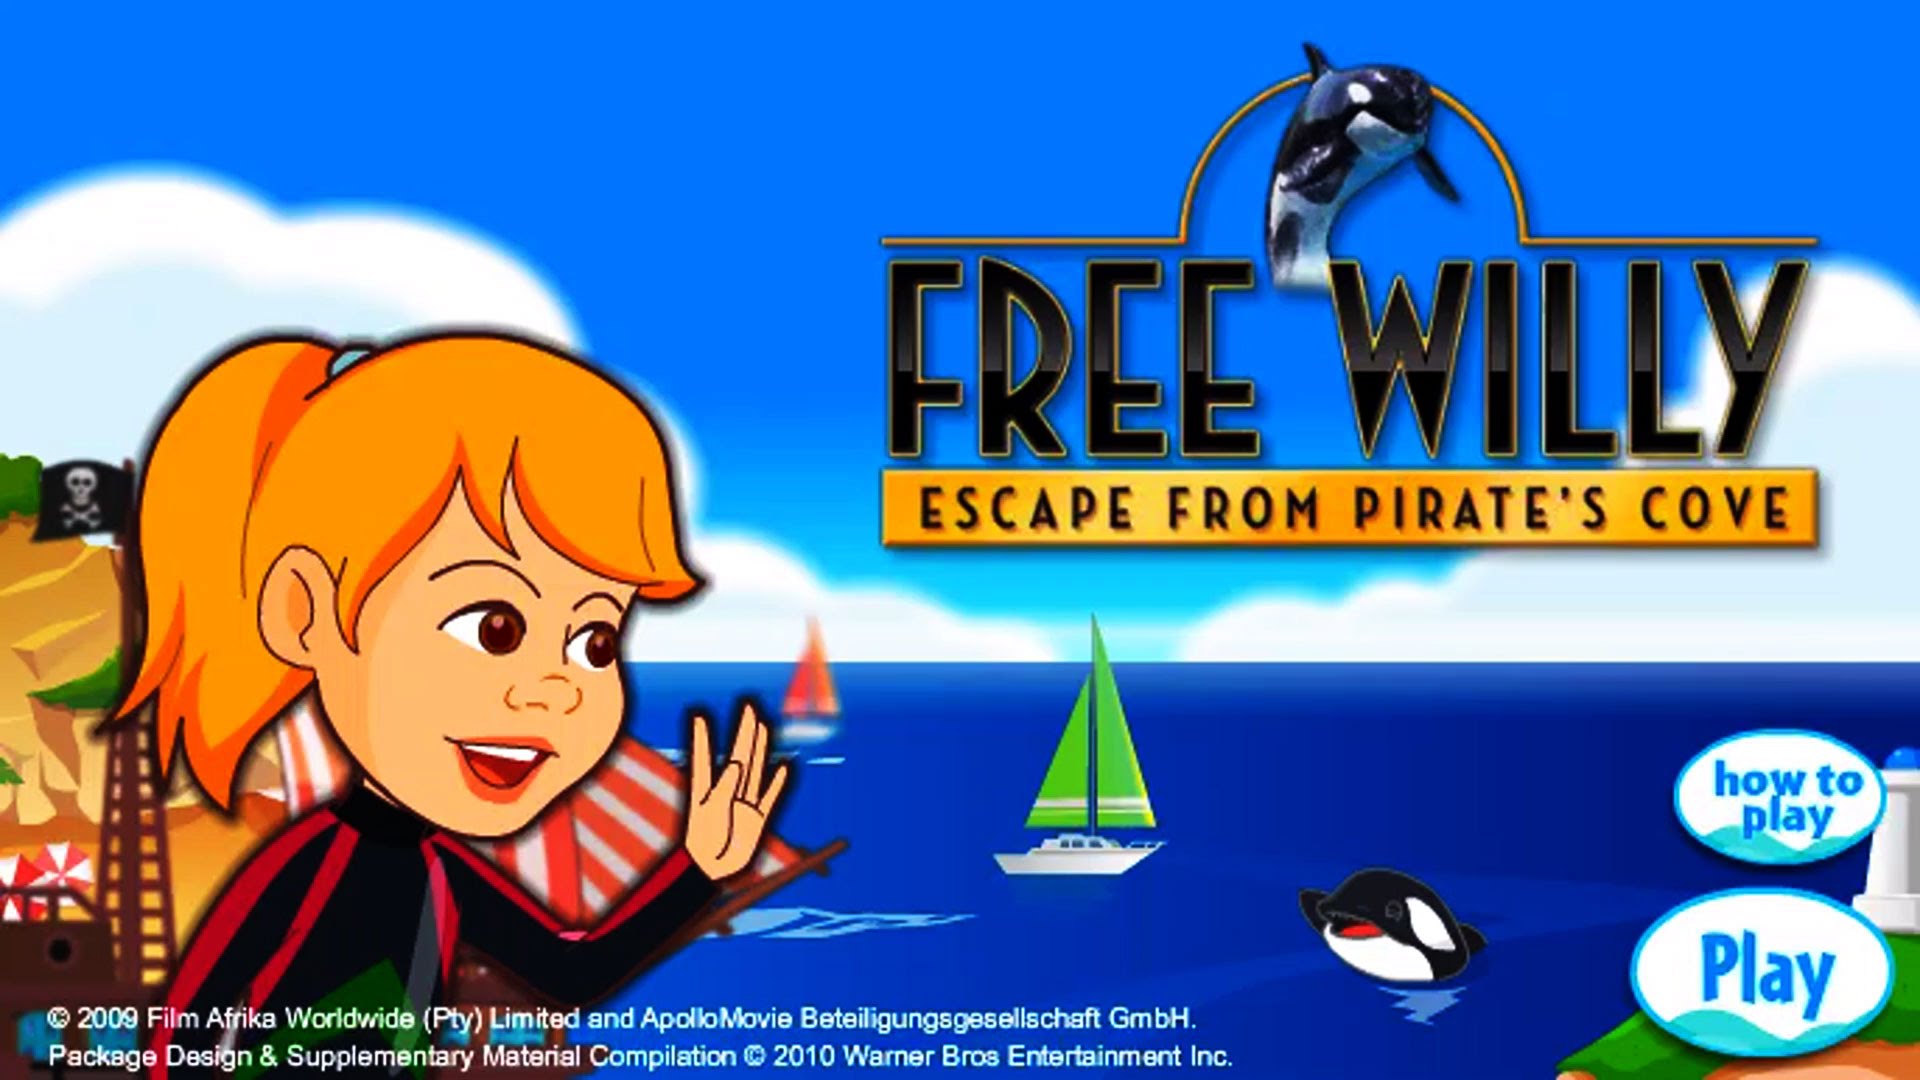 Free Willy: Escape From Pirate's Cove HD wallpapers, Desktop wallpaper - most viewed